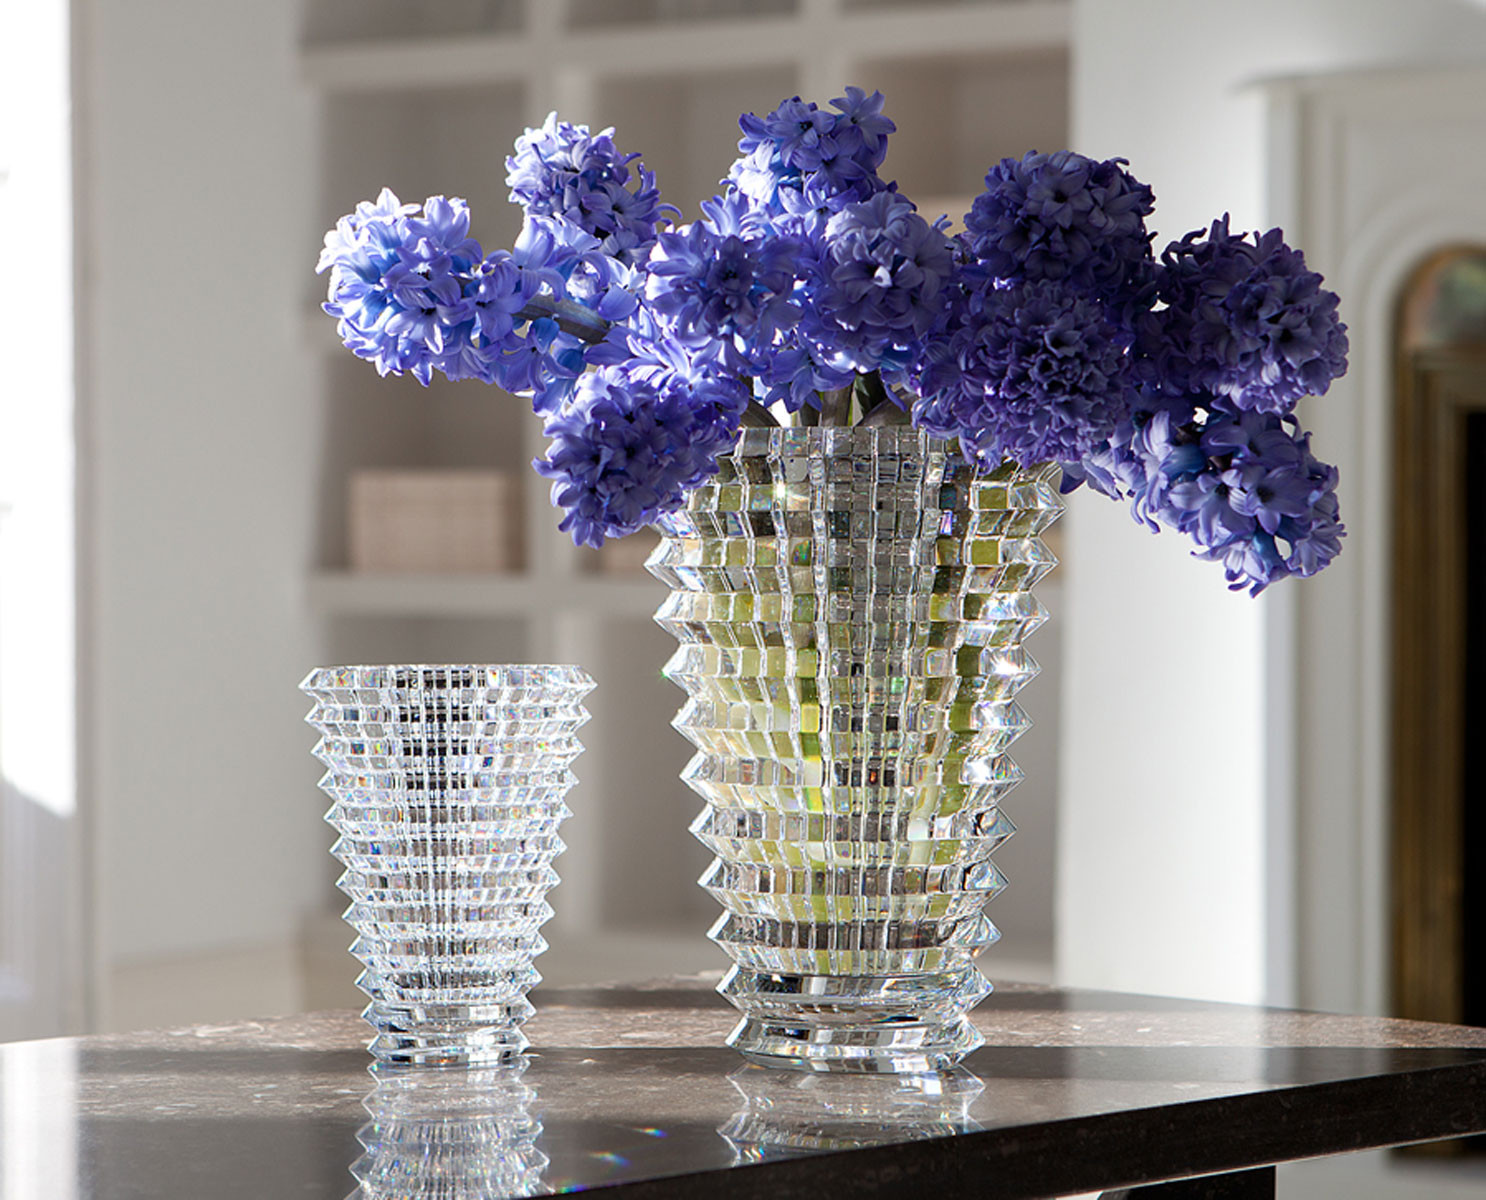 10 Best Small Artificial Flowers In Vase 2024 free download small artificial flowers in vase of small vase flower ideas flowers healthy pertaining to vases design pictures blue flower baccarat crystal vase two diffe size large and small simple